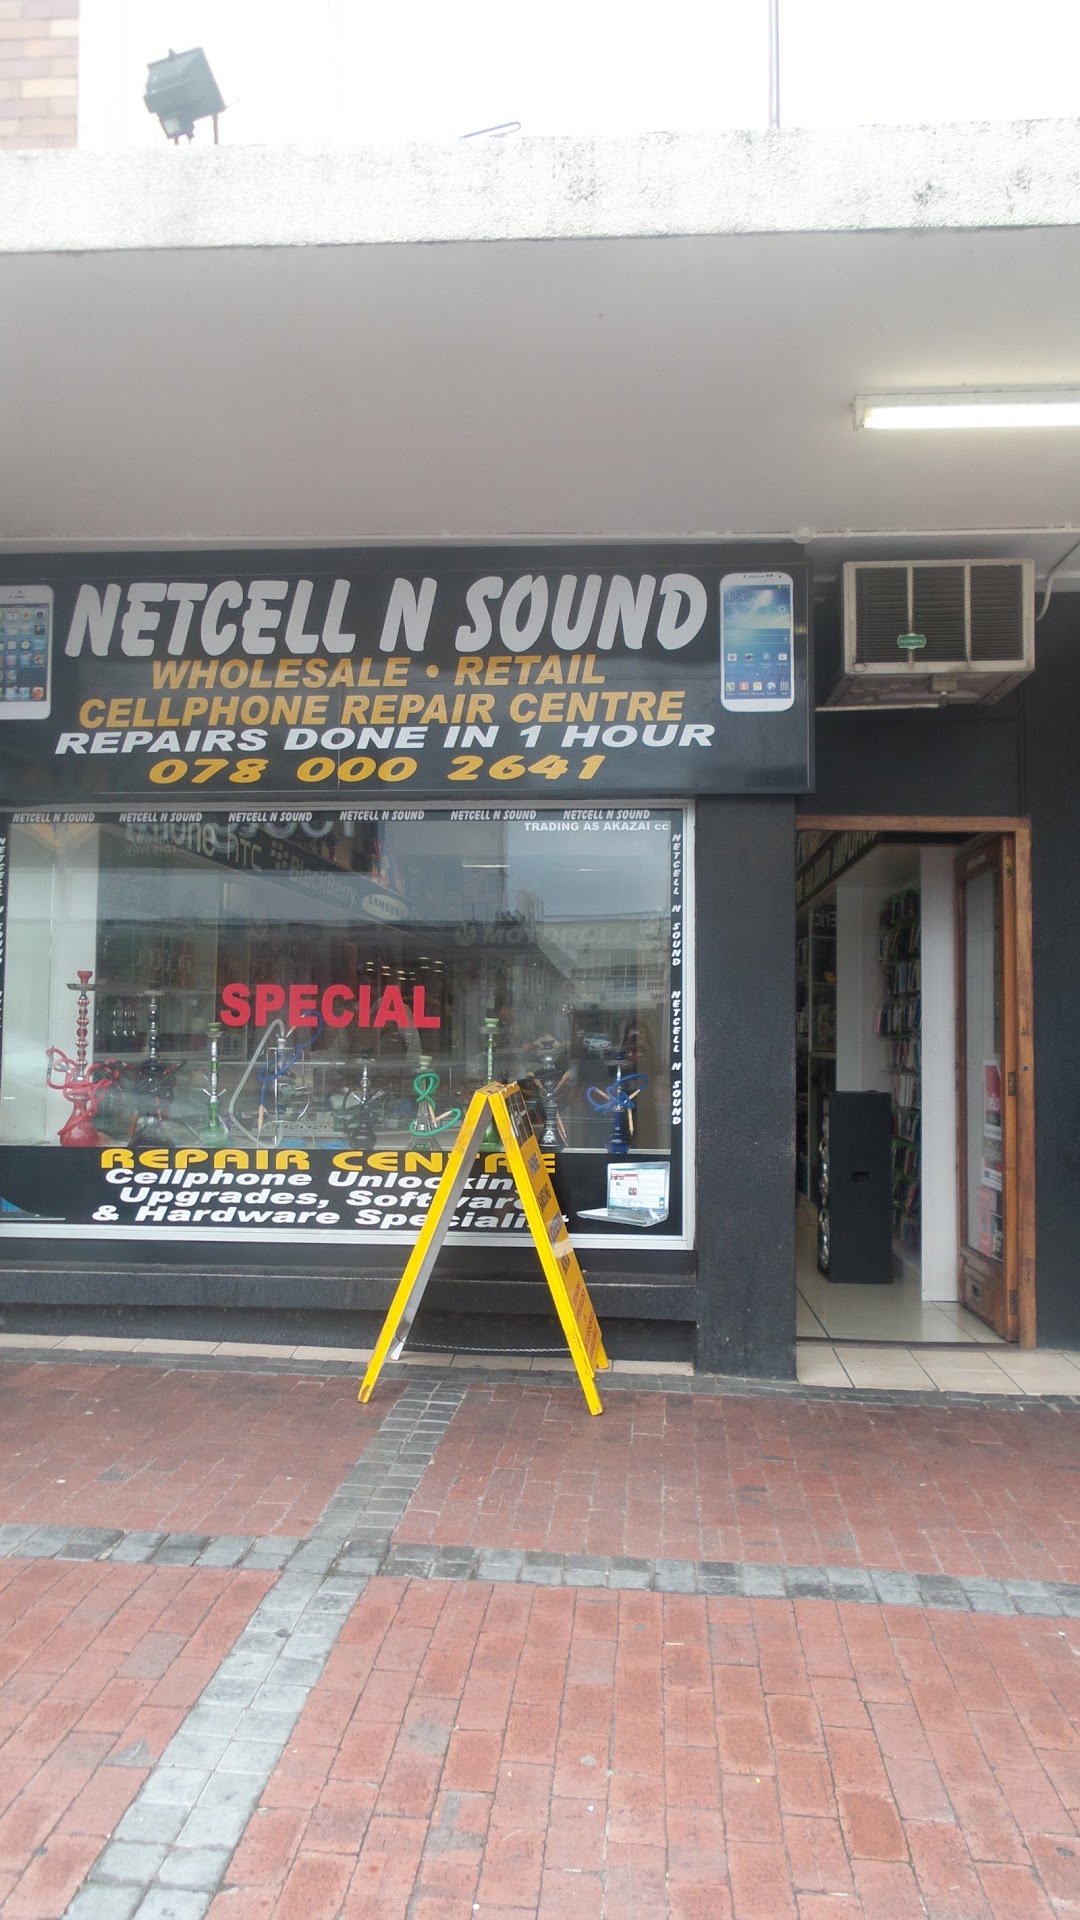 Netcell N Sound